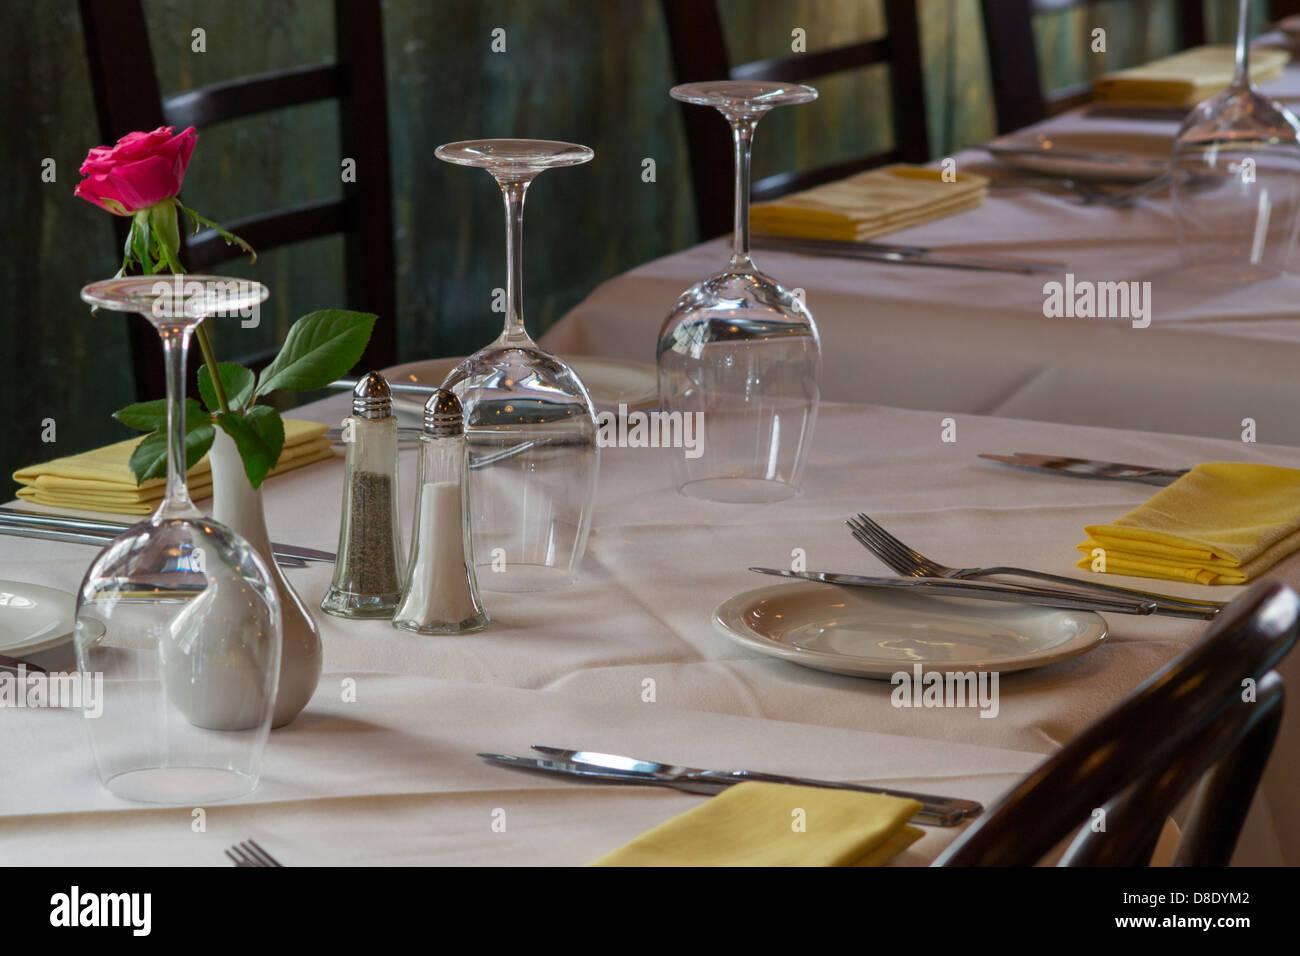 A line of newly made restaurant tables Stock Photo